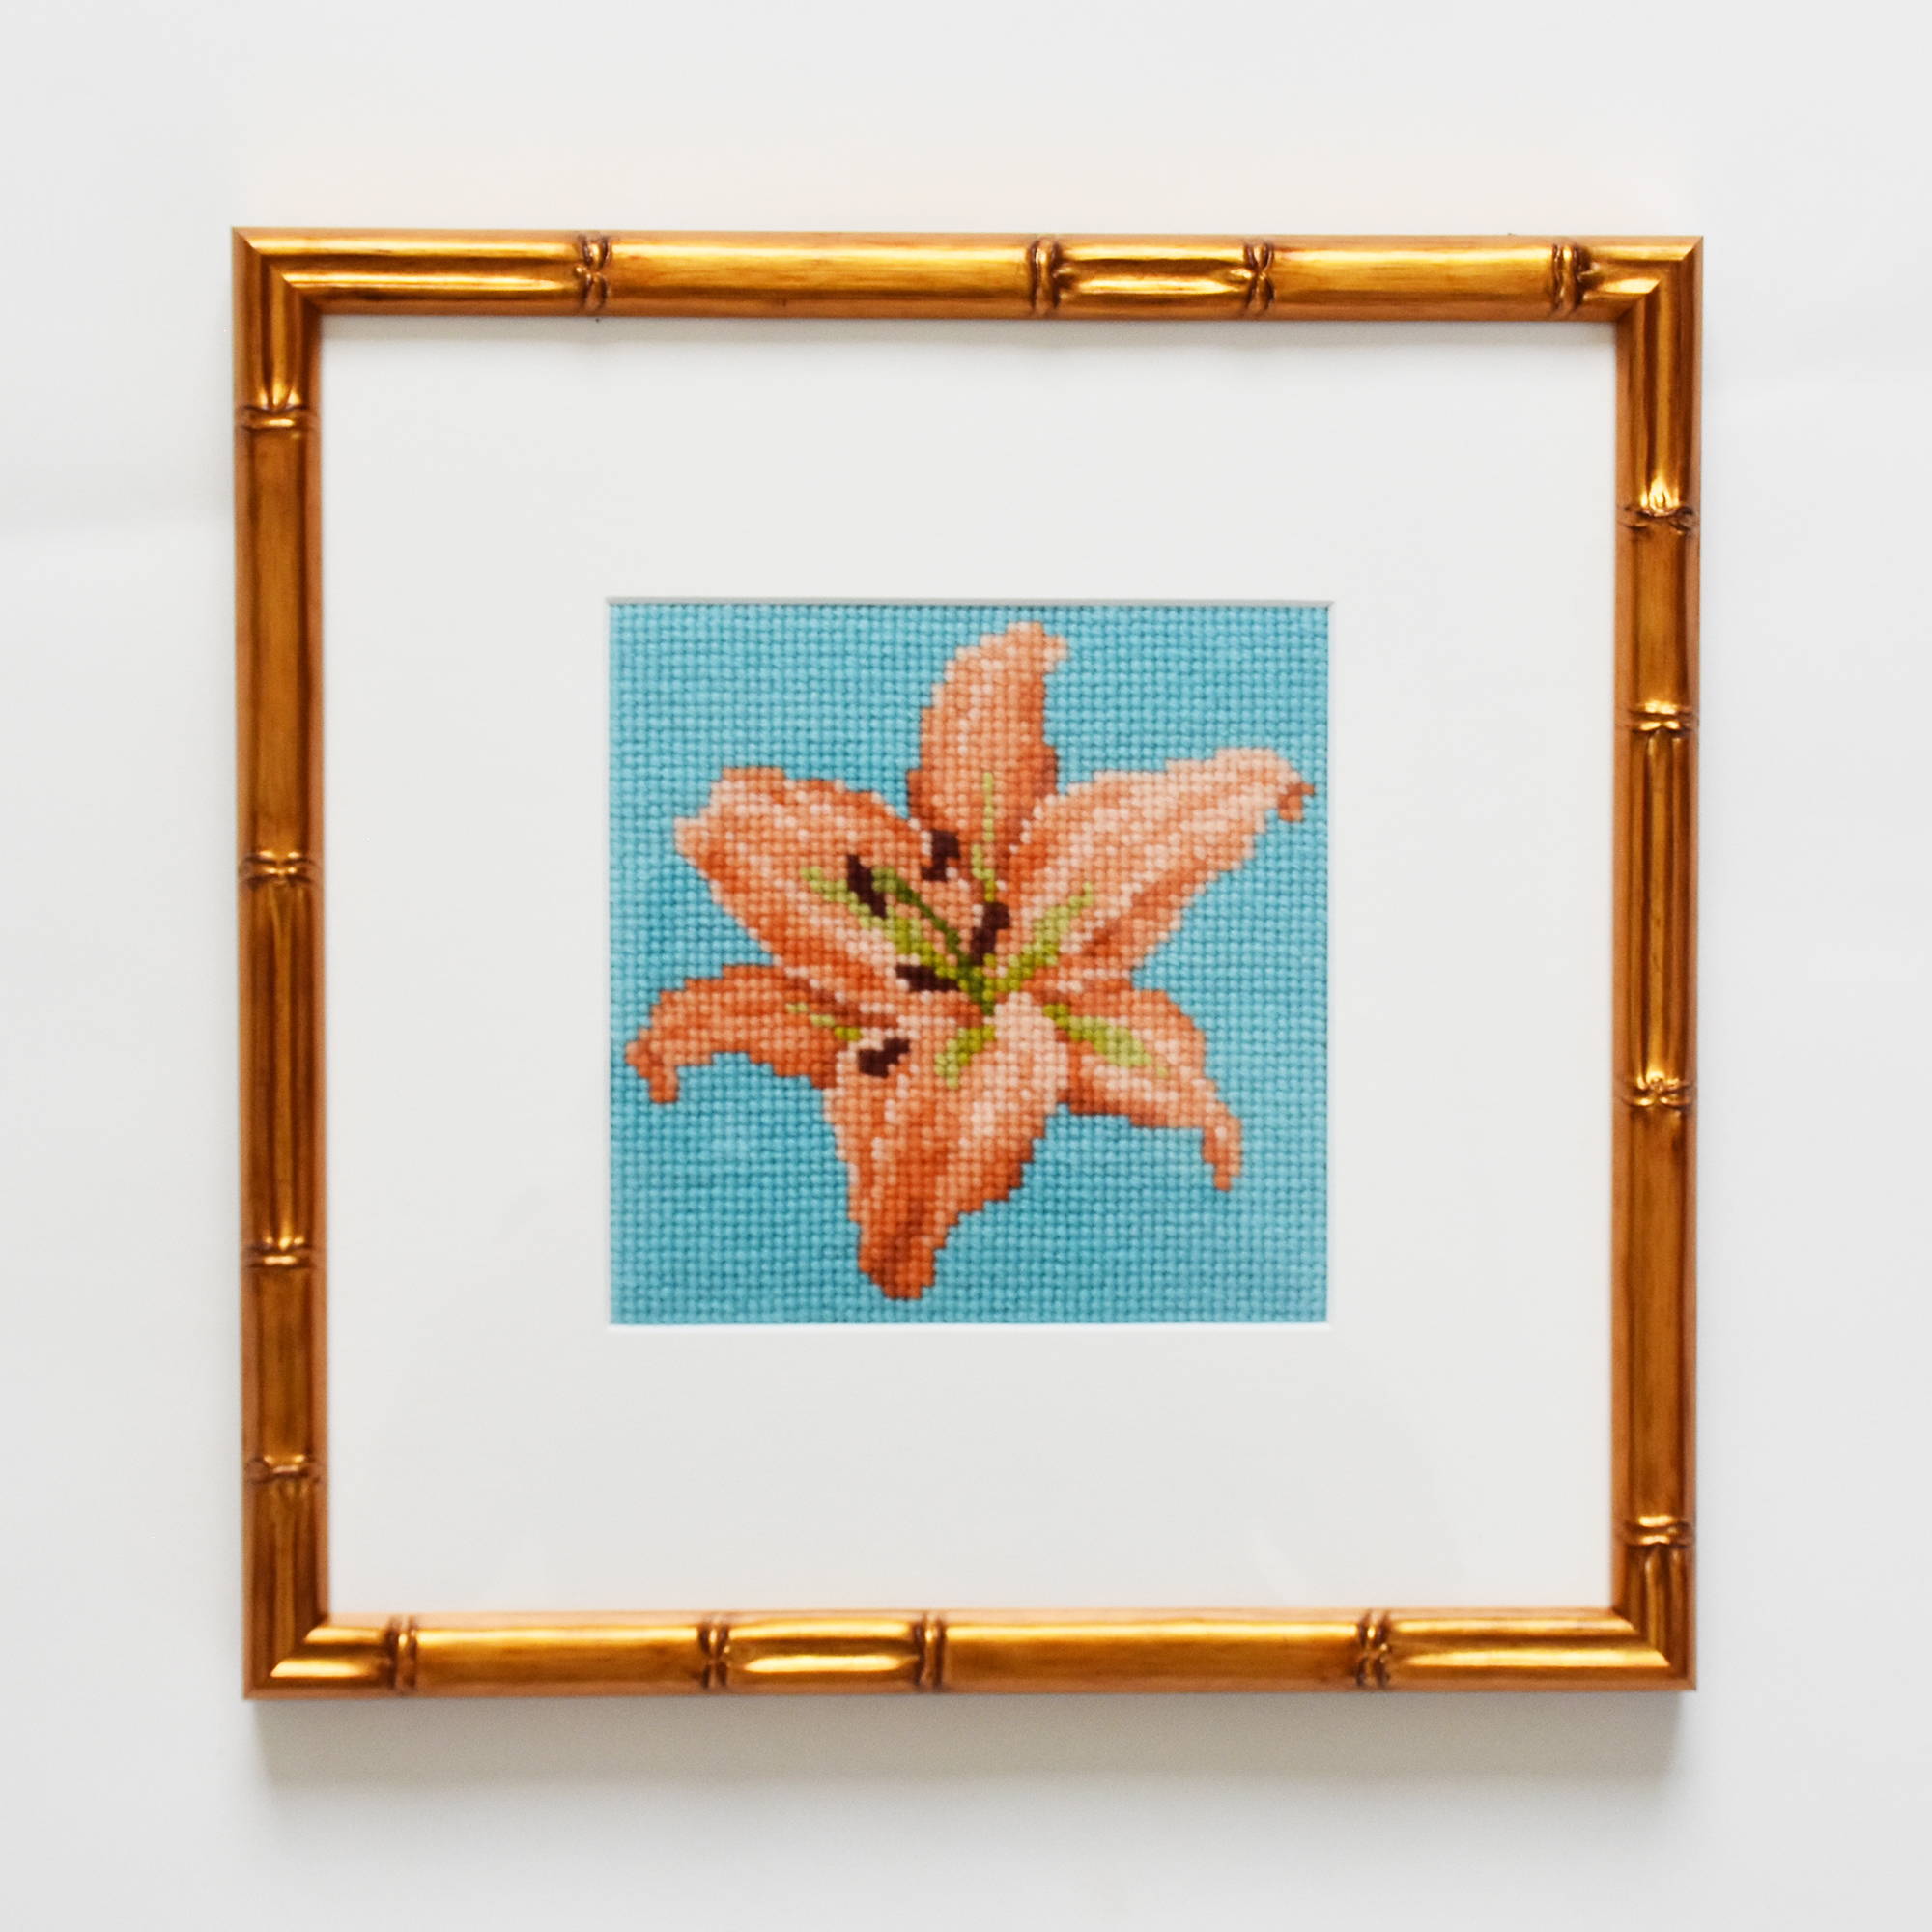 The Lily Mini Kit framed with gold bamboo frame